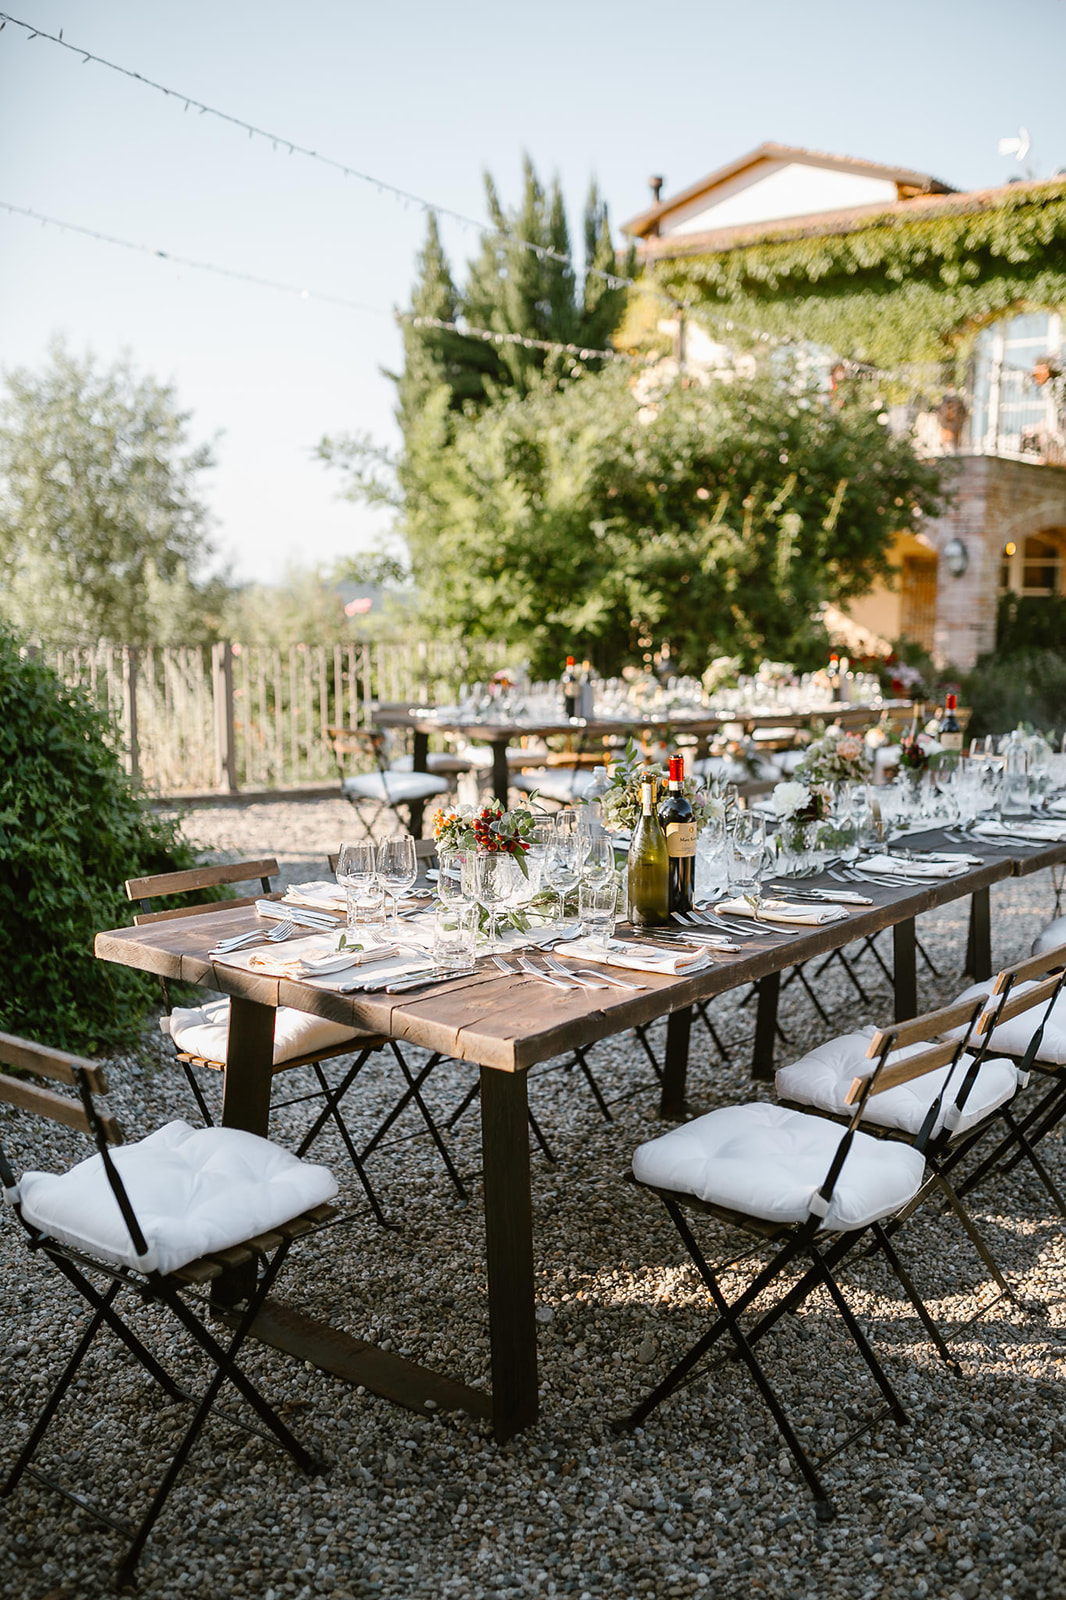 Wood imperial table for a country wedding in Mombaruzzo